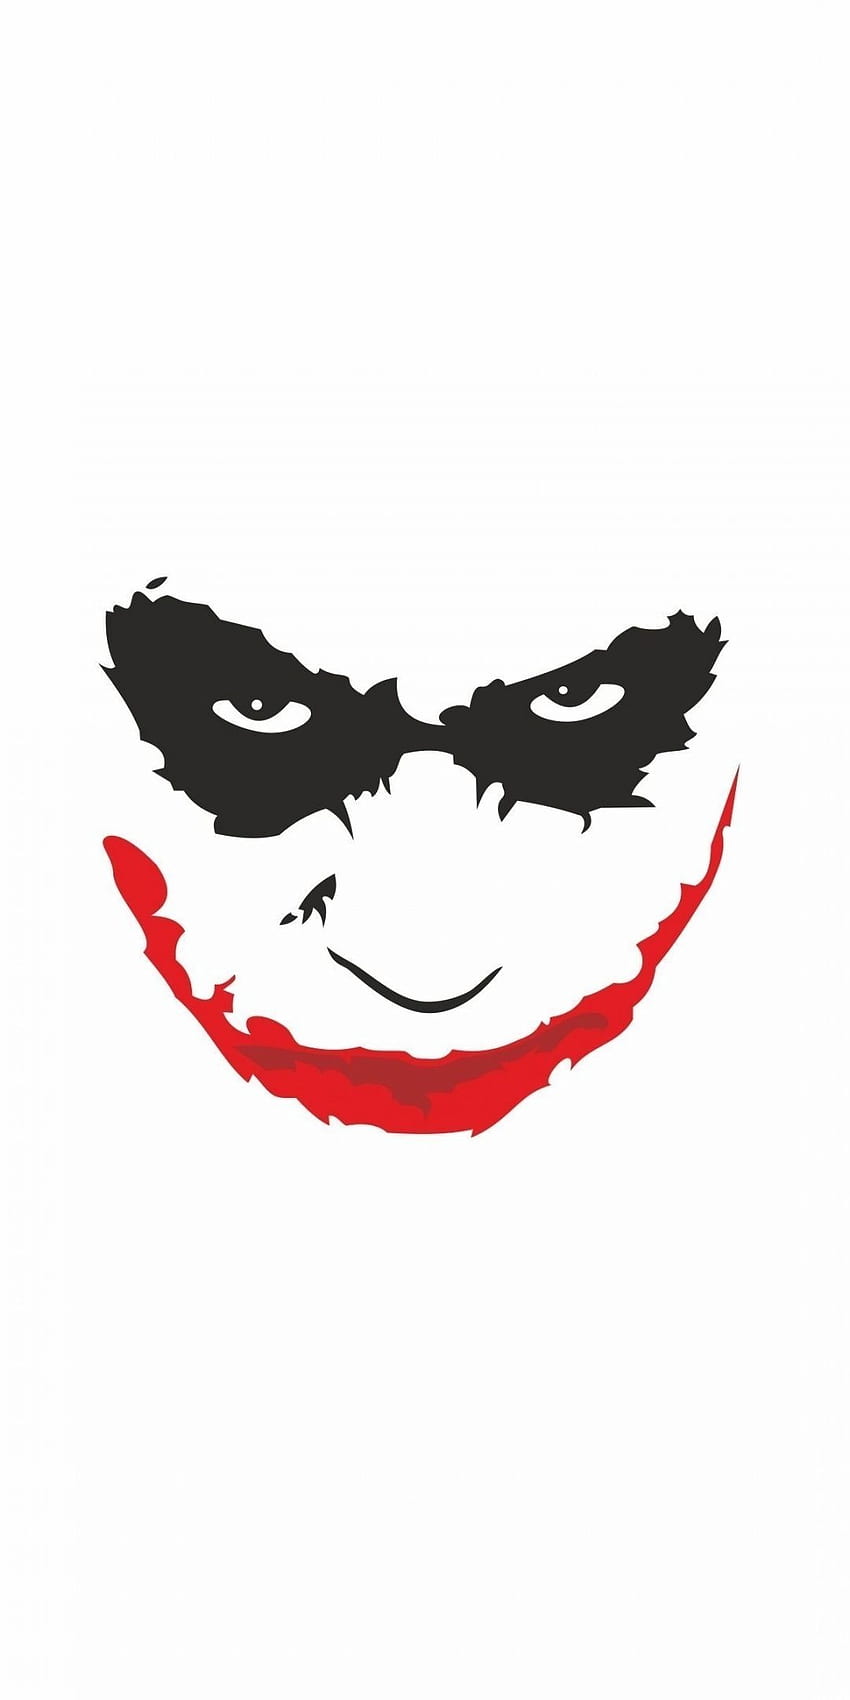 Drawing of a horror face resembling the joker on Craiyon